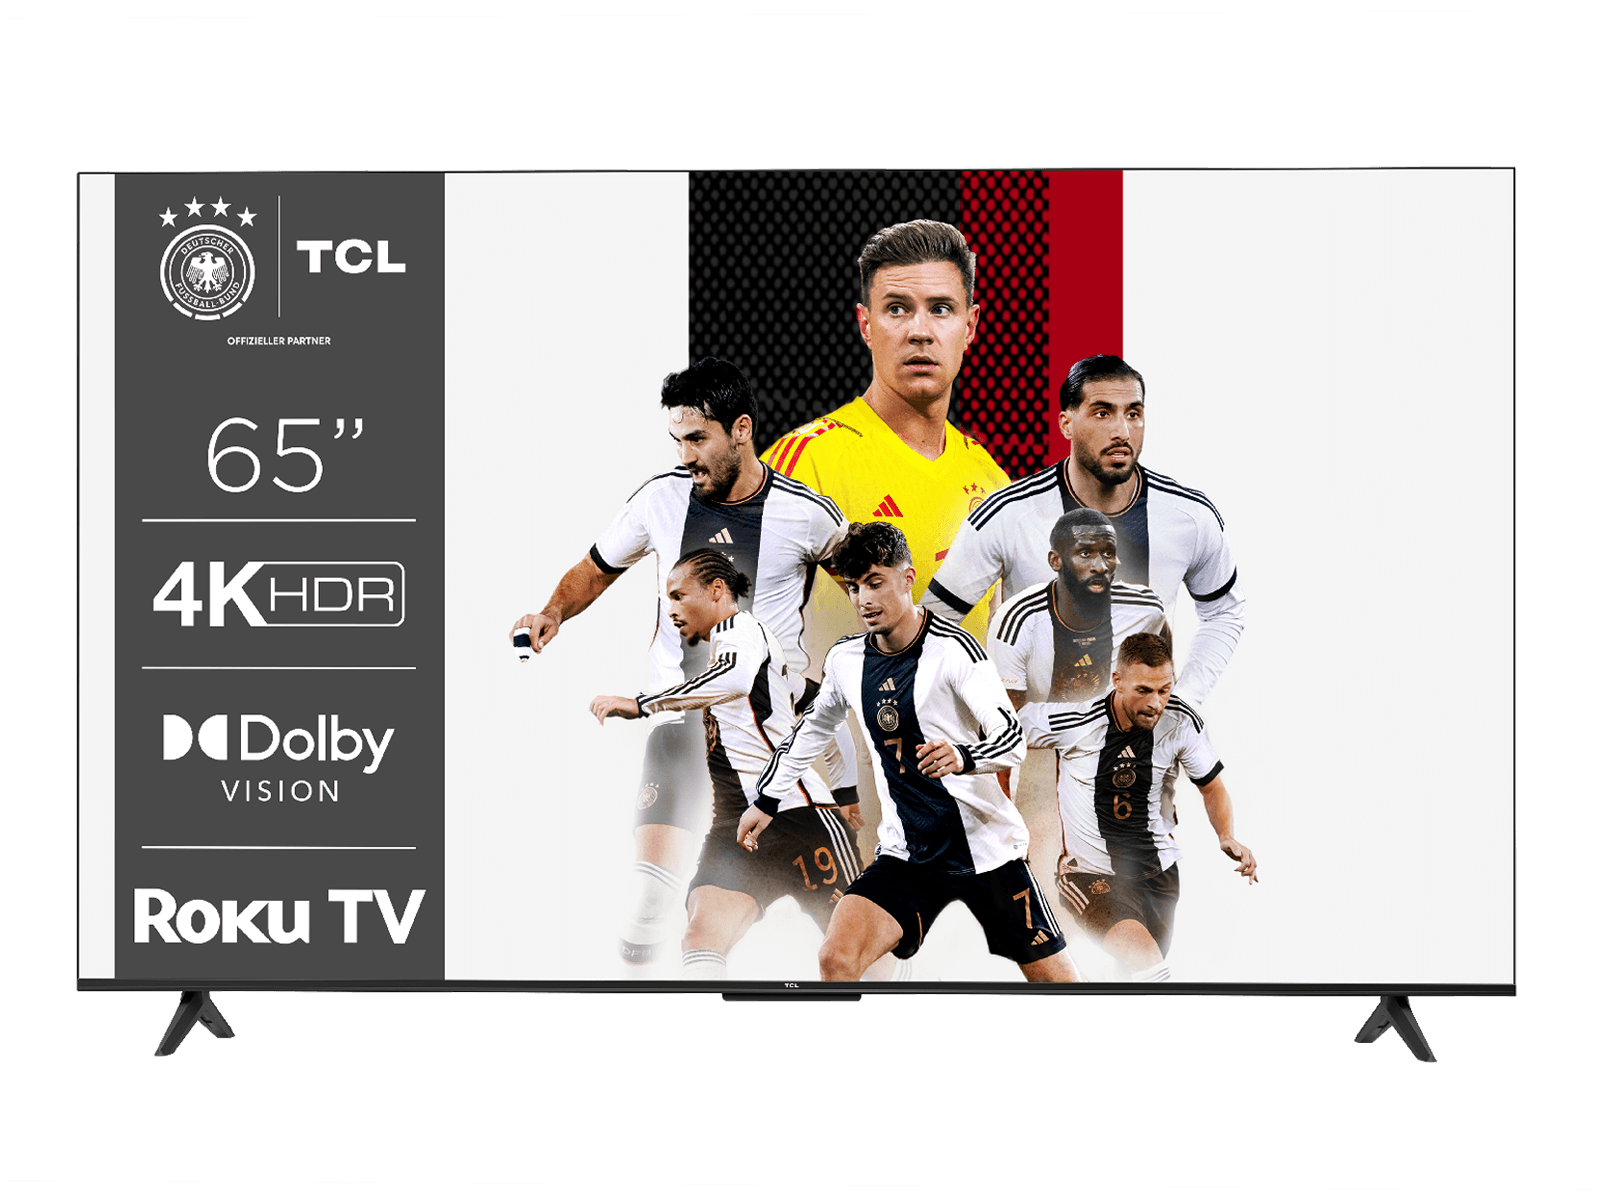 TCL LED-Fernseher (164 cm/65 Zoll, HDR, Game Vision, 4K Ultra Dolby HD, HDMI HDR10, Roku Master, TV, Smart-TV